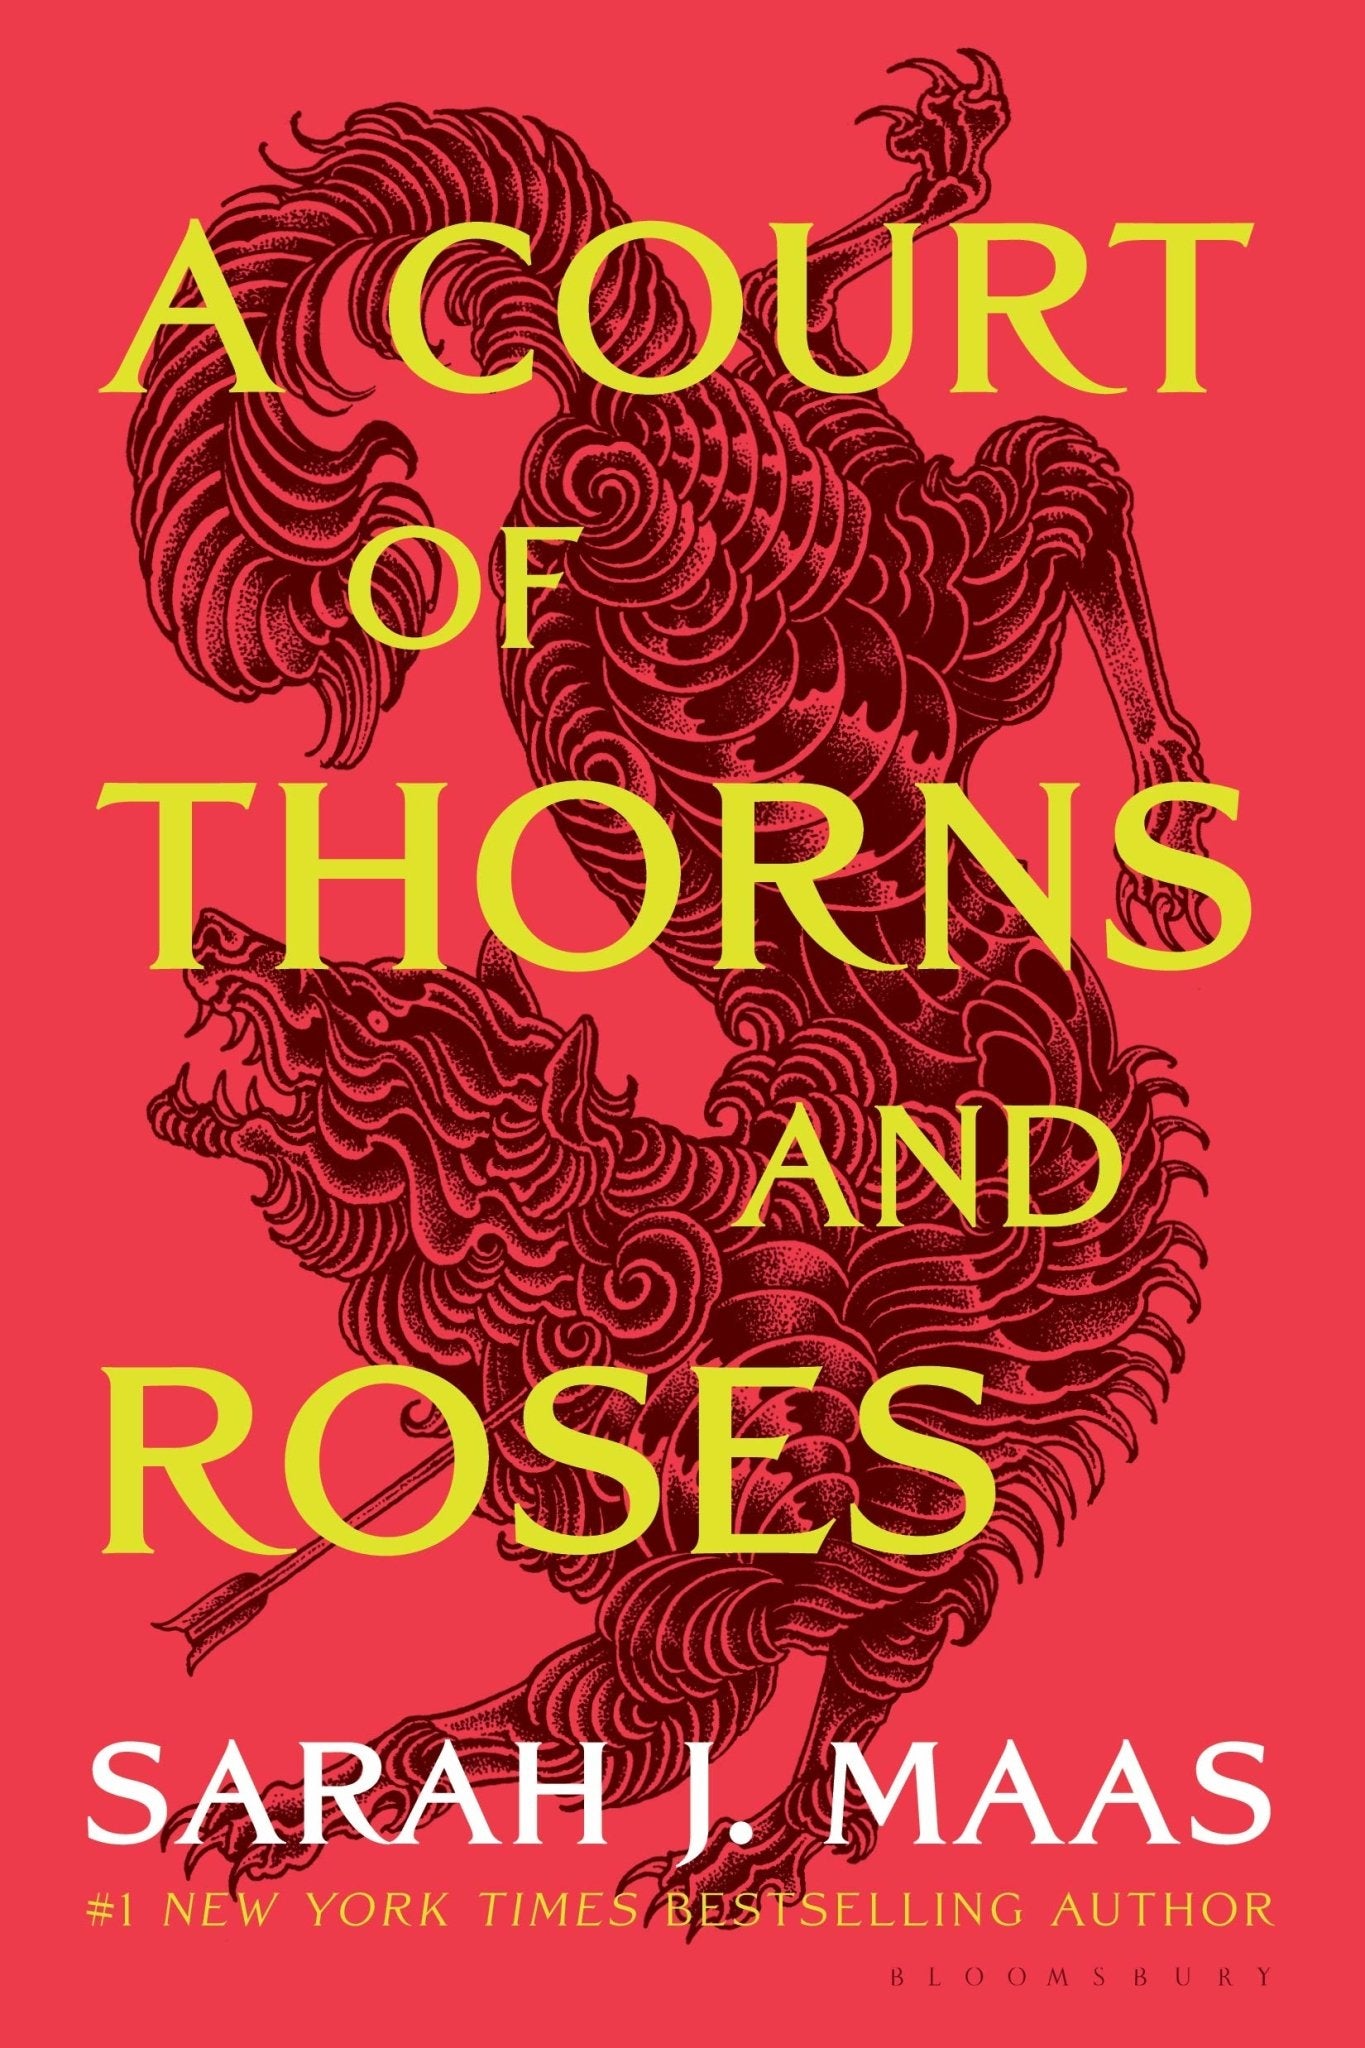 A Court of Thorns and Roses (Court of Thorns and Roses #1) by Sarah J. Maas [Paperback] - LV'S Global Media